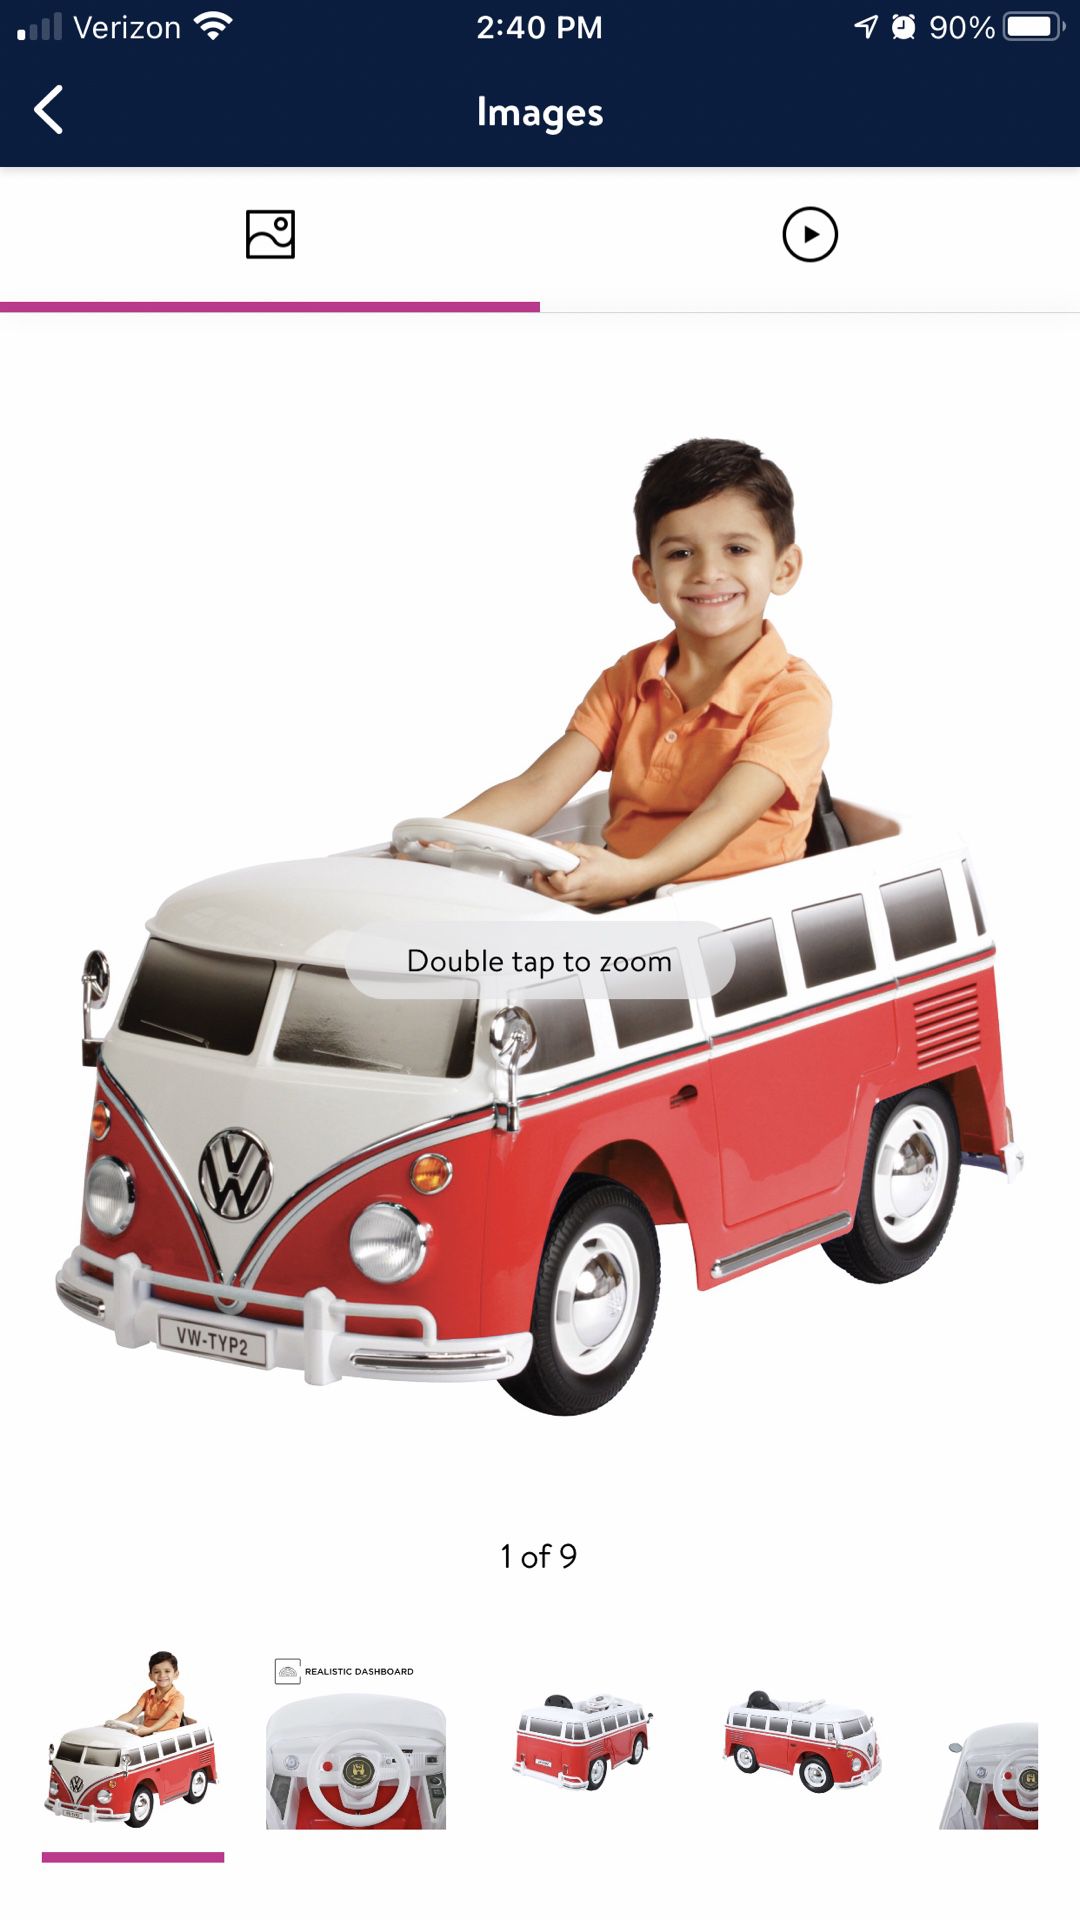 Rollplay 6 Volt VW Bus Ride On Toy, Battery-Powered Kid's Ride On Car ( New in Box)